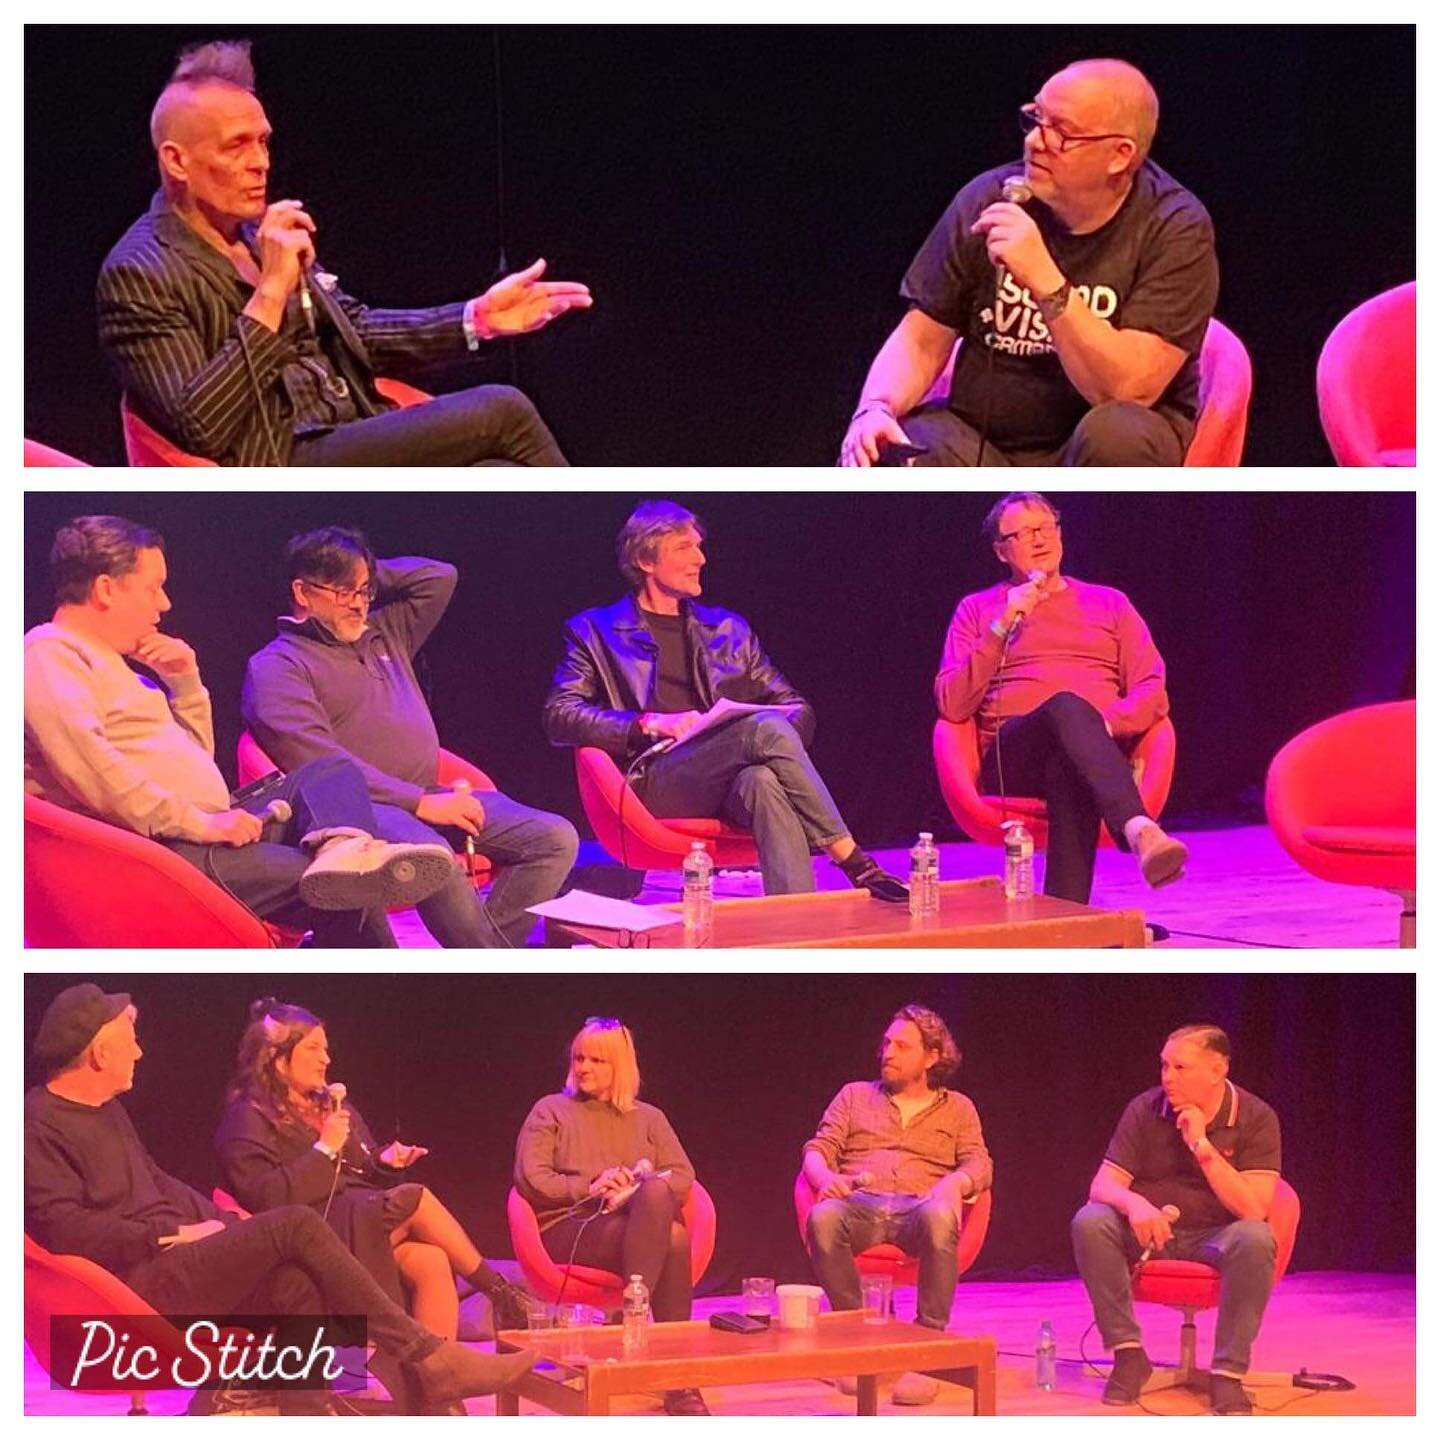 Our 2 day music industry conference at @cambridgejunction is almost over, and what amazing guests we have had. Thank you to everyone for participating and to all those attending! 

Top 👉 @johnrobb77 &ldquo;History of Goth&rdquo;
Middle 👉 Sync Panel